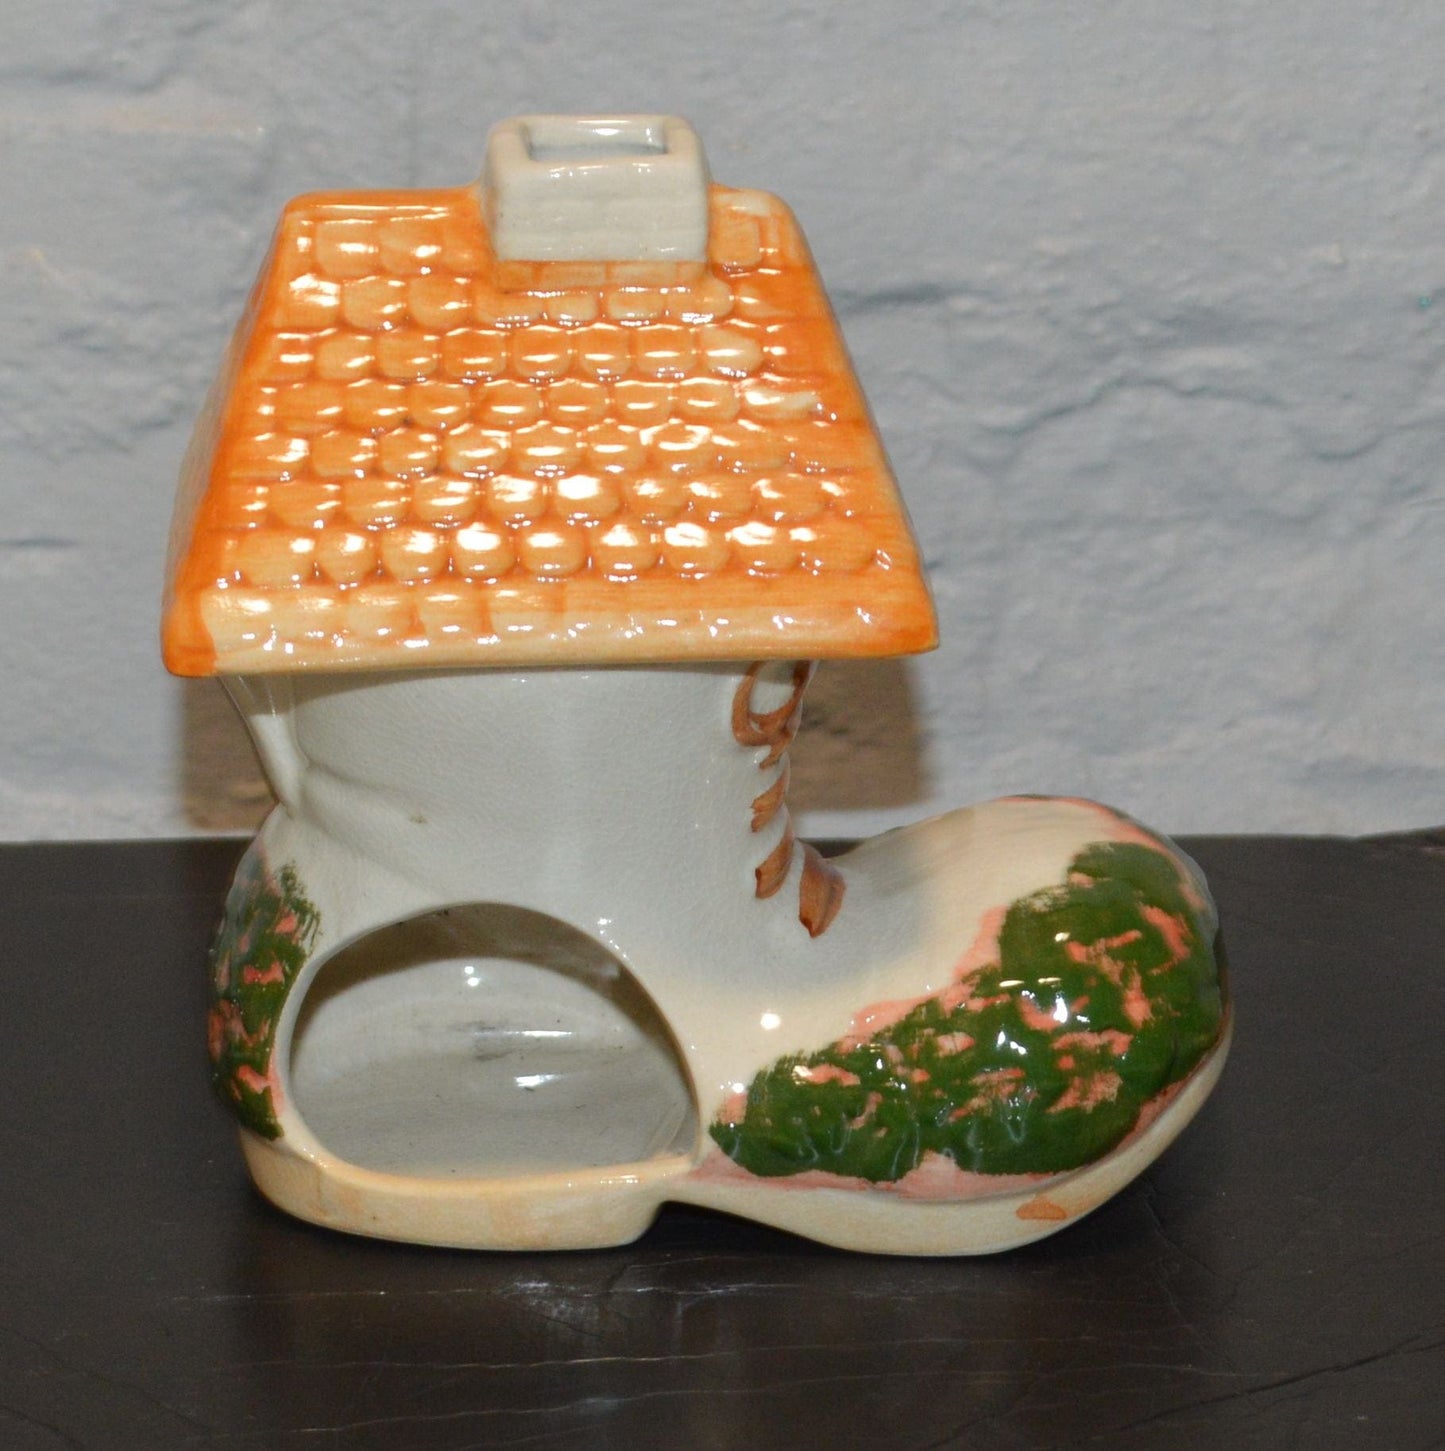 ORNAMENTAL BOOT HOUSE TEA LIGHT CANDLE HOLDER(PREVIOUSLY OWNED)GOOD CONDITION - TMD167207